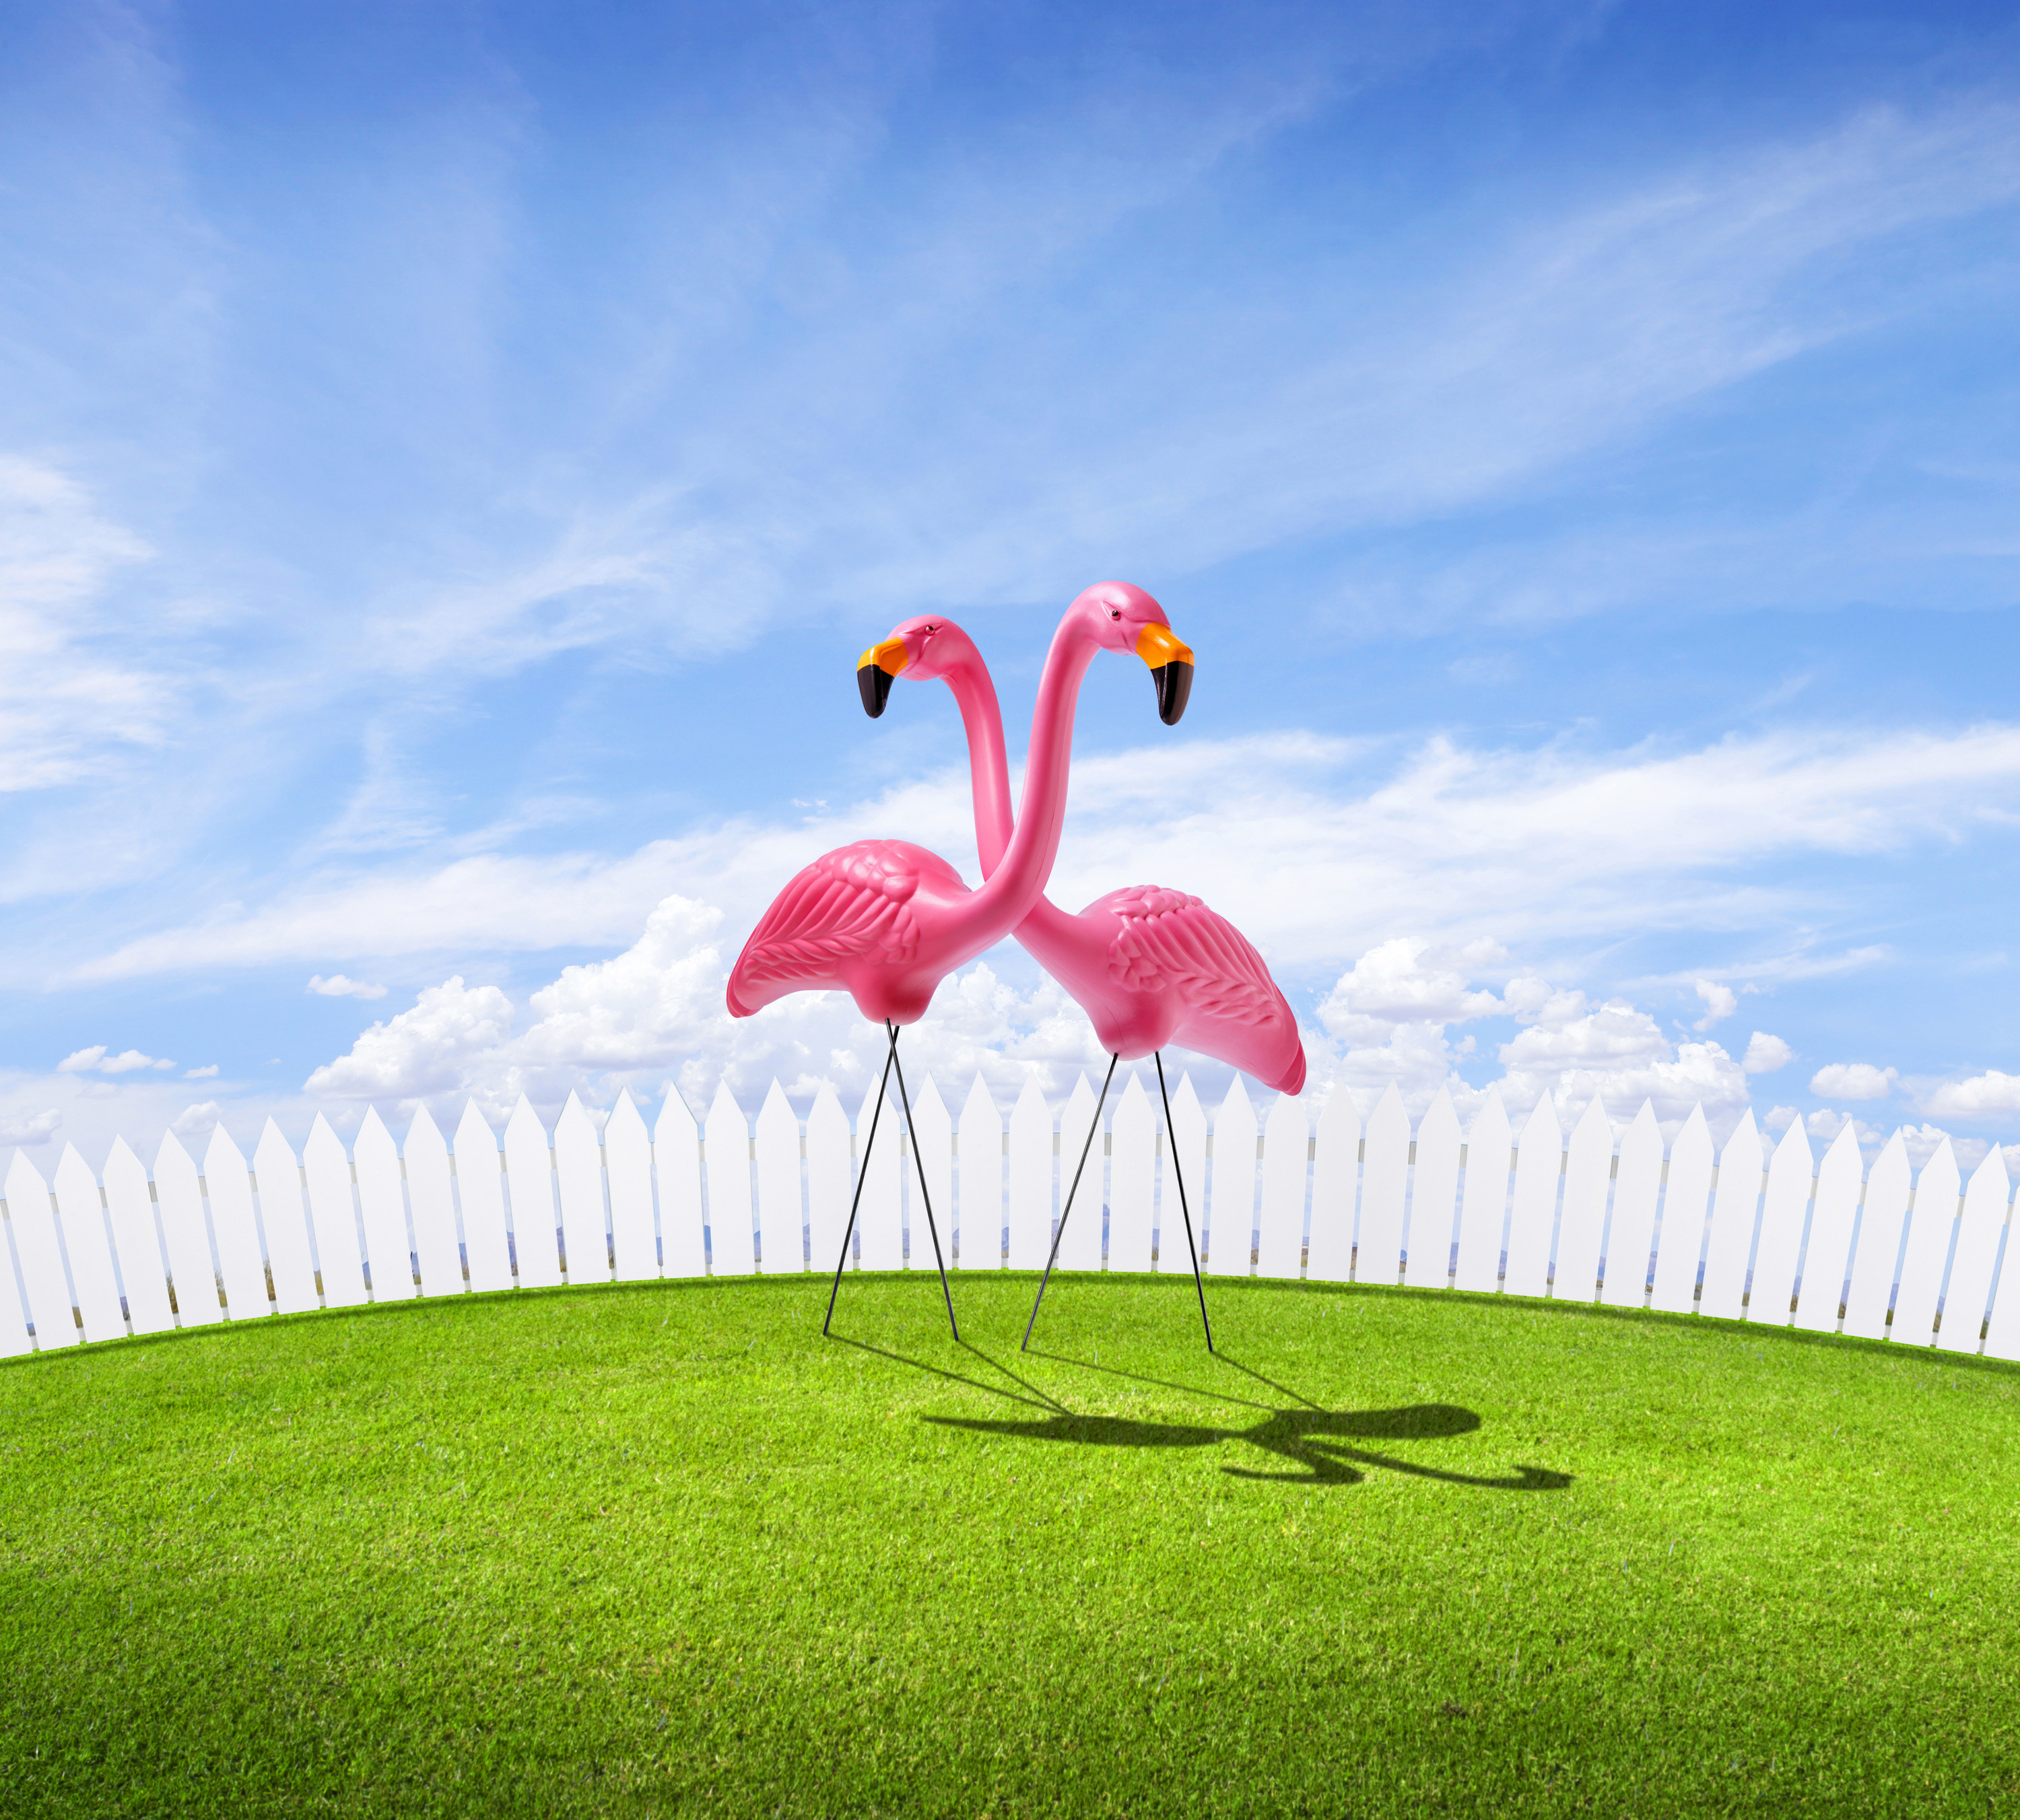 Pink flamingos in a lawn with a white picket fence